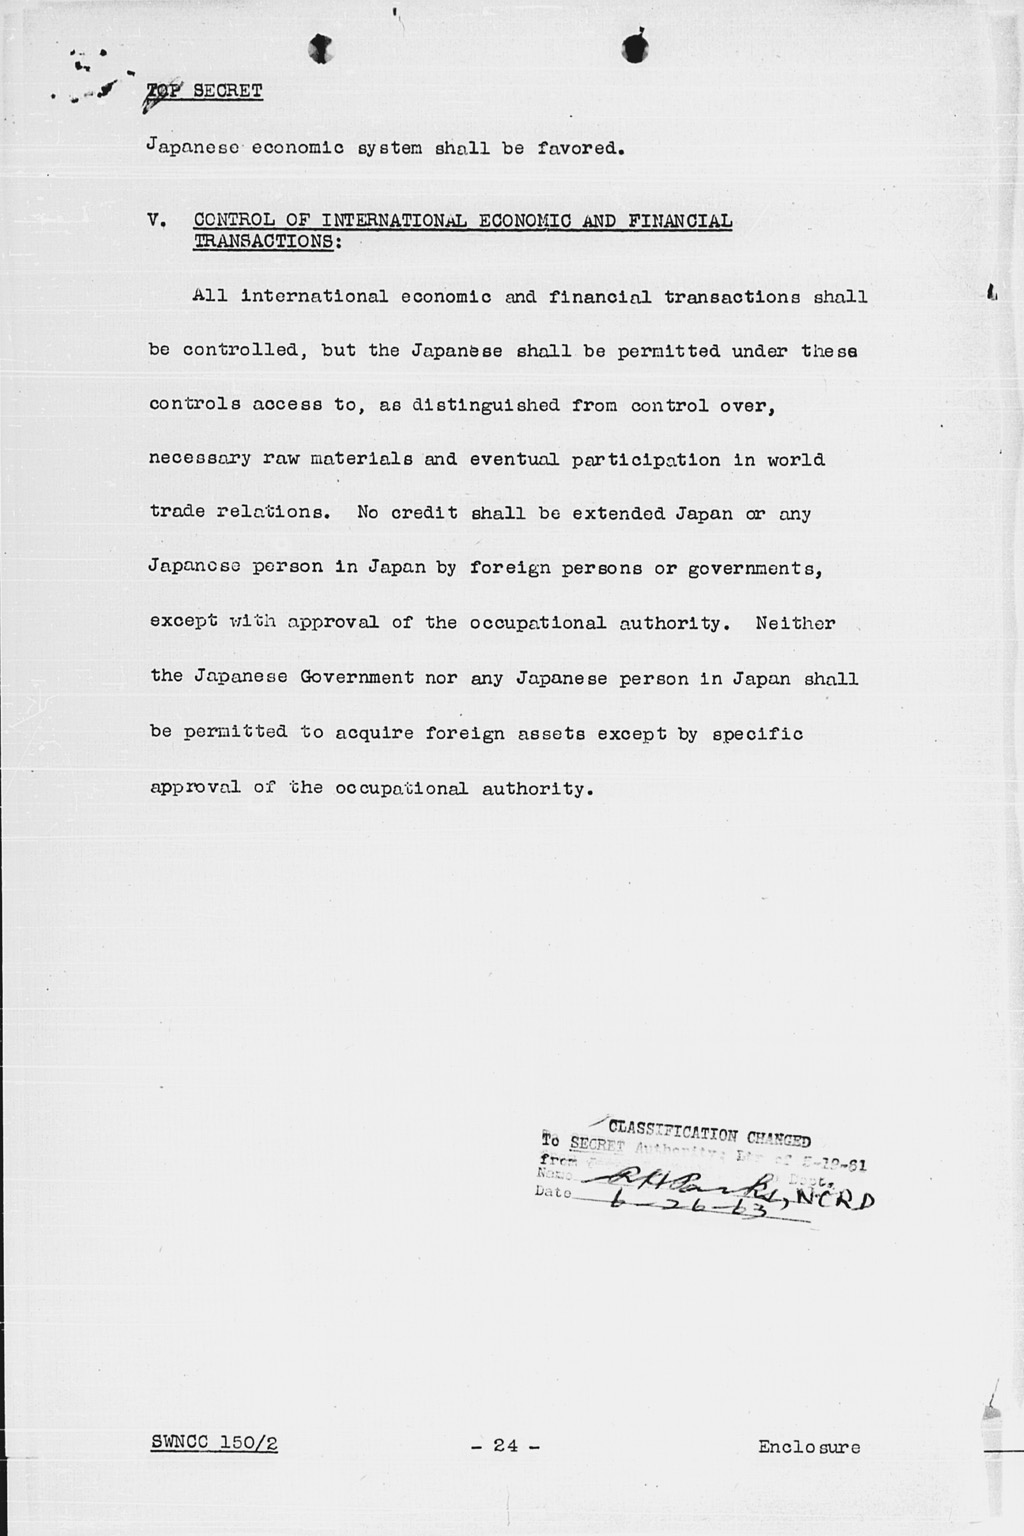 [United States Initial Post-Defeat Policy Relating to Japan (SWNCC150/2)](Larger image)